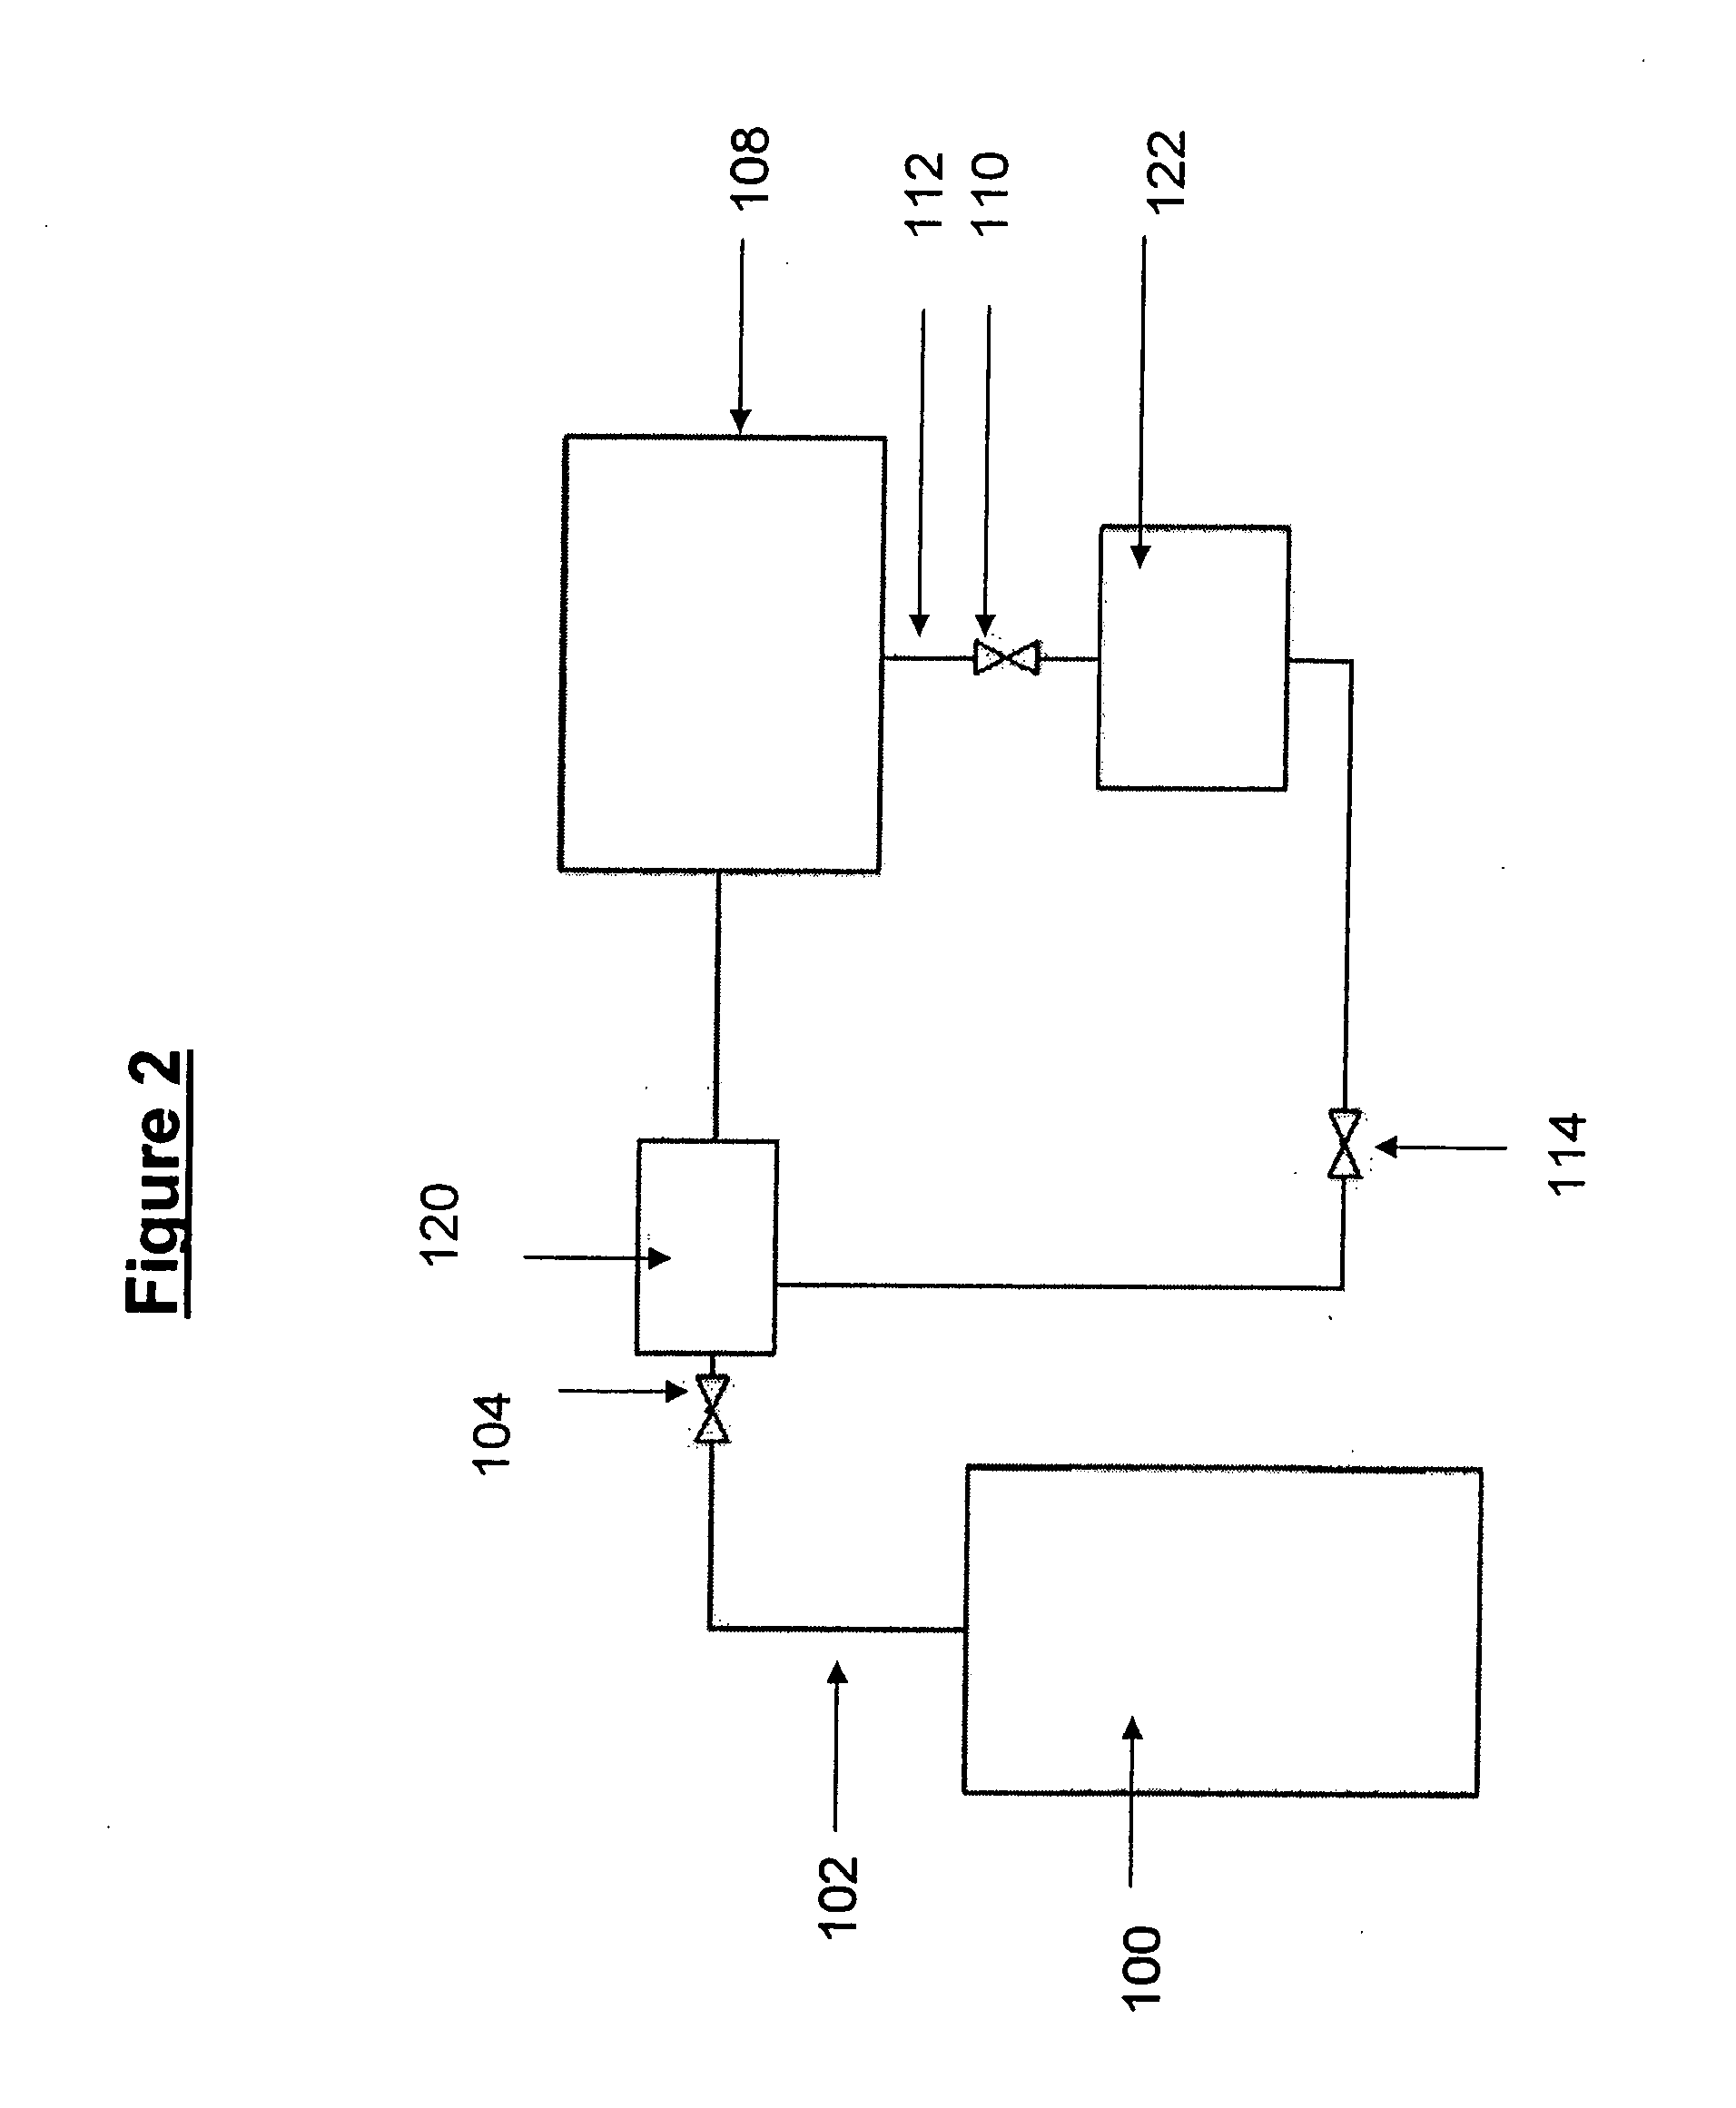 Fuel cell purge cycle apparatus and method